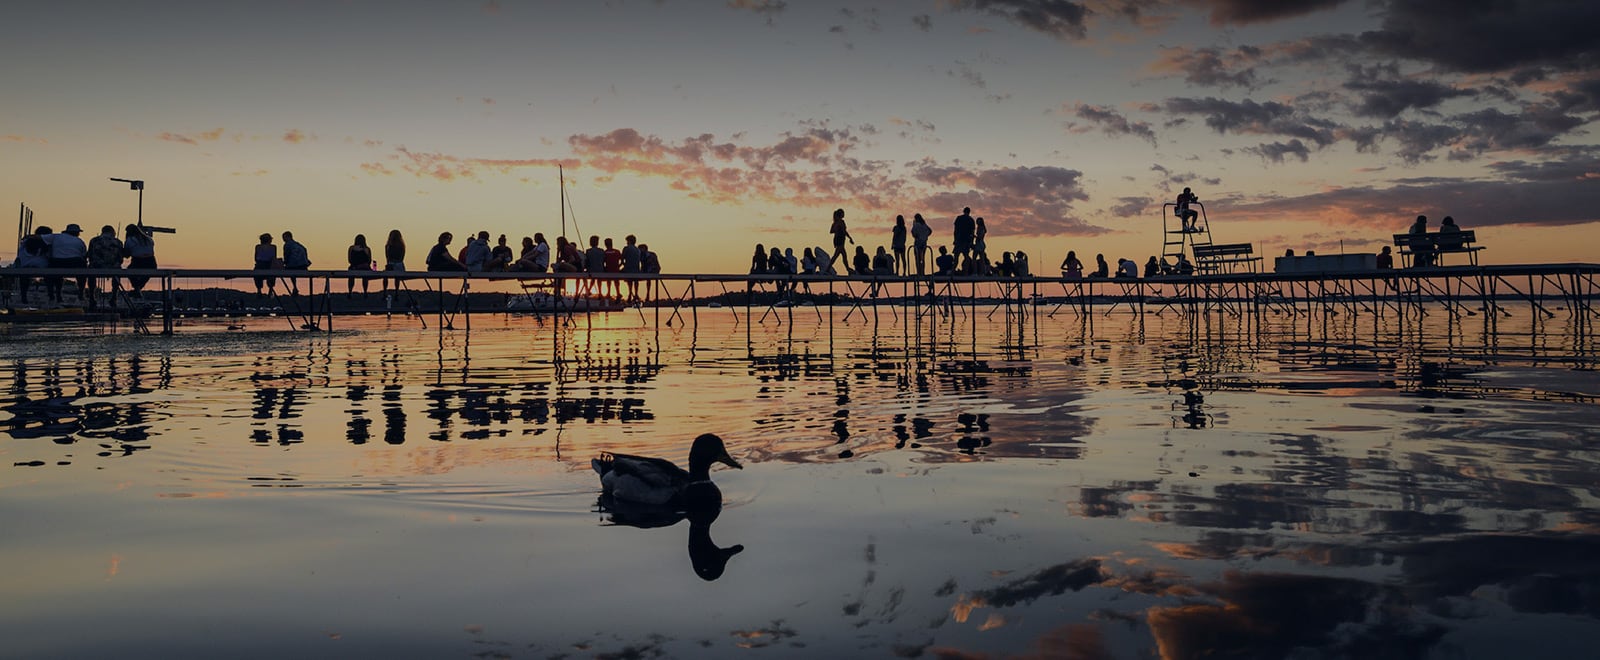 Duck swimming on Lake Mendota including silhouettes of people in the late-afternoon sunset.